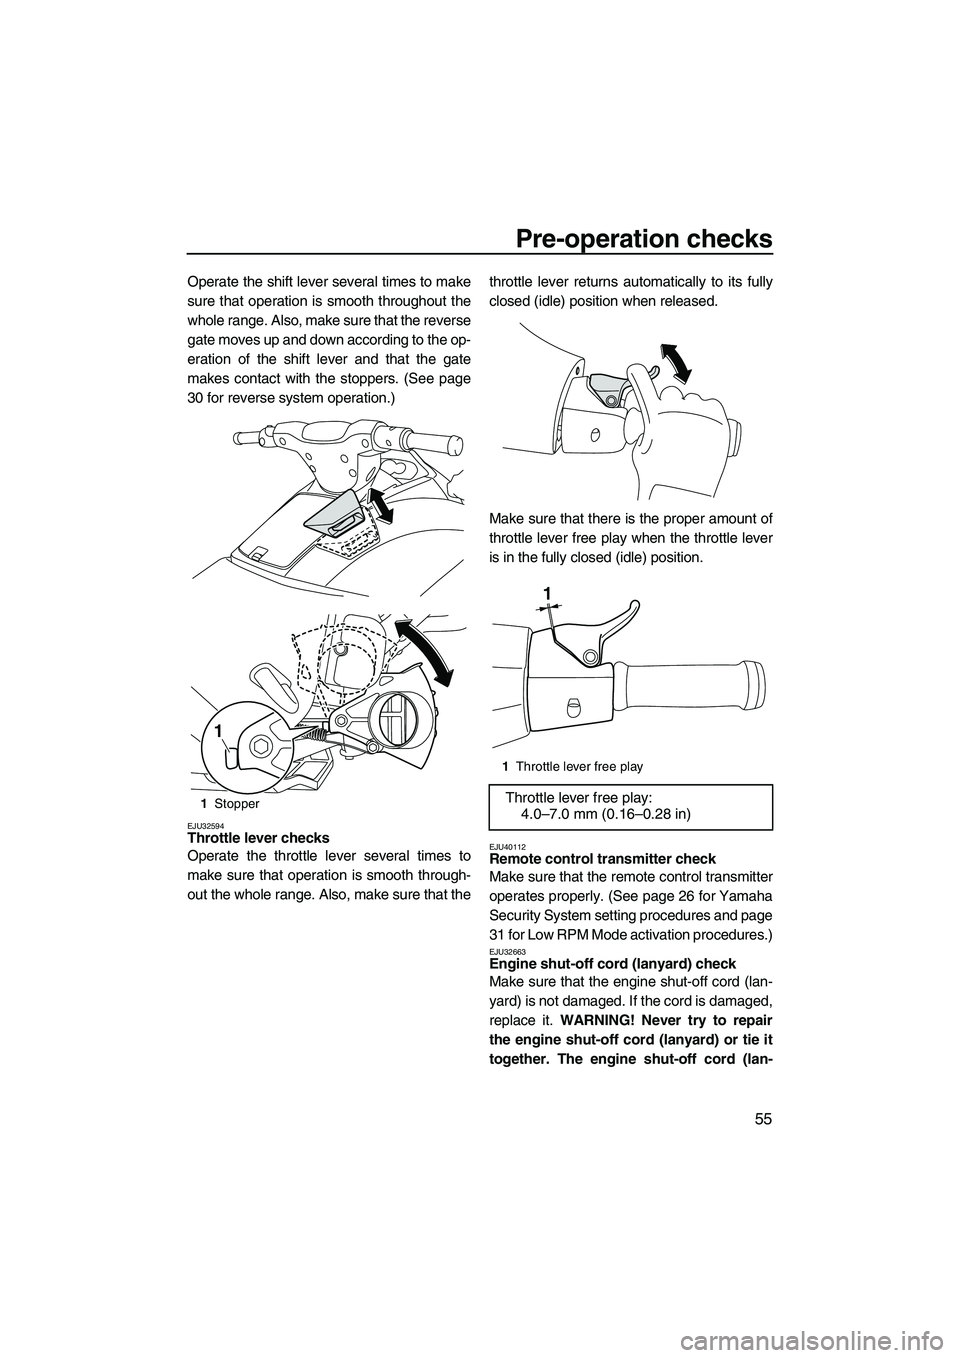 YAMAHA VXR 2013  Owners Manual Pre-operation checks
55
Operate the shift lever several times to make
sure that operation is smooth throughout the
whole range. Also, make sure that the reverse
gate moves up and down according to the